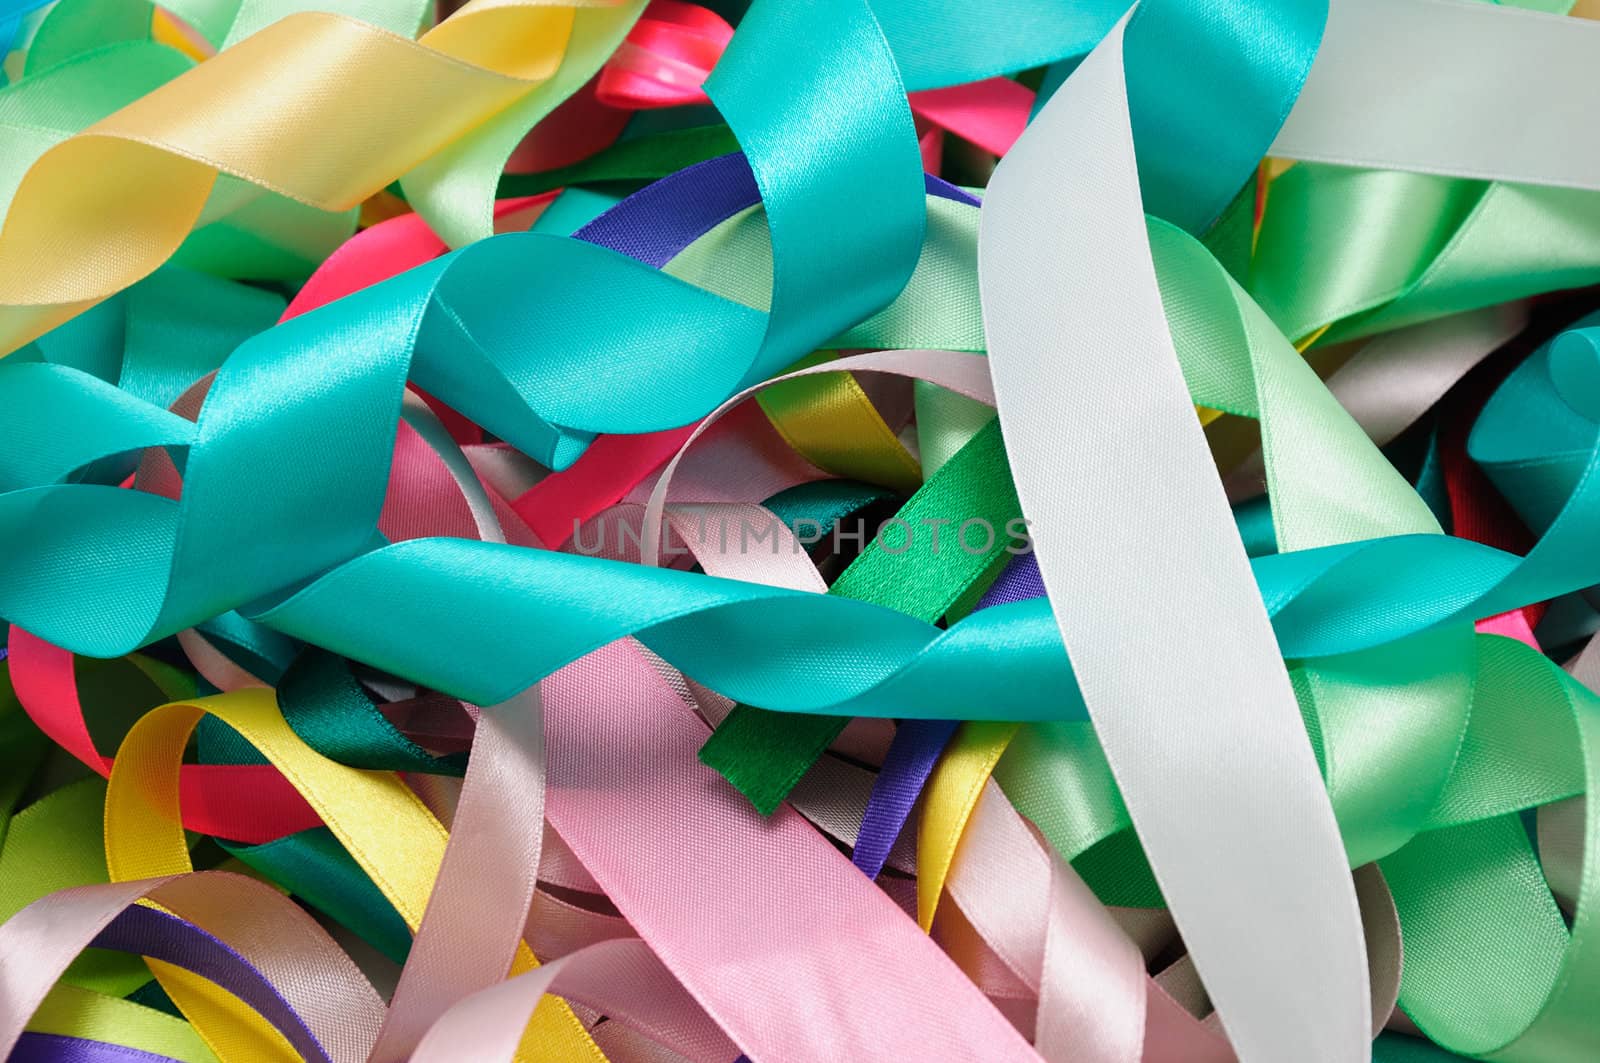 Multi-colored satin ribbons by Apolonia